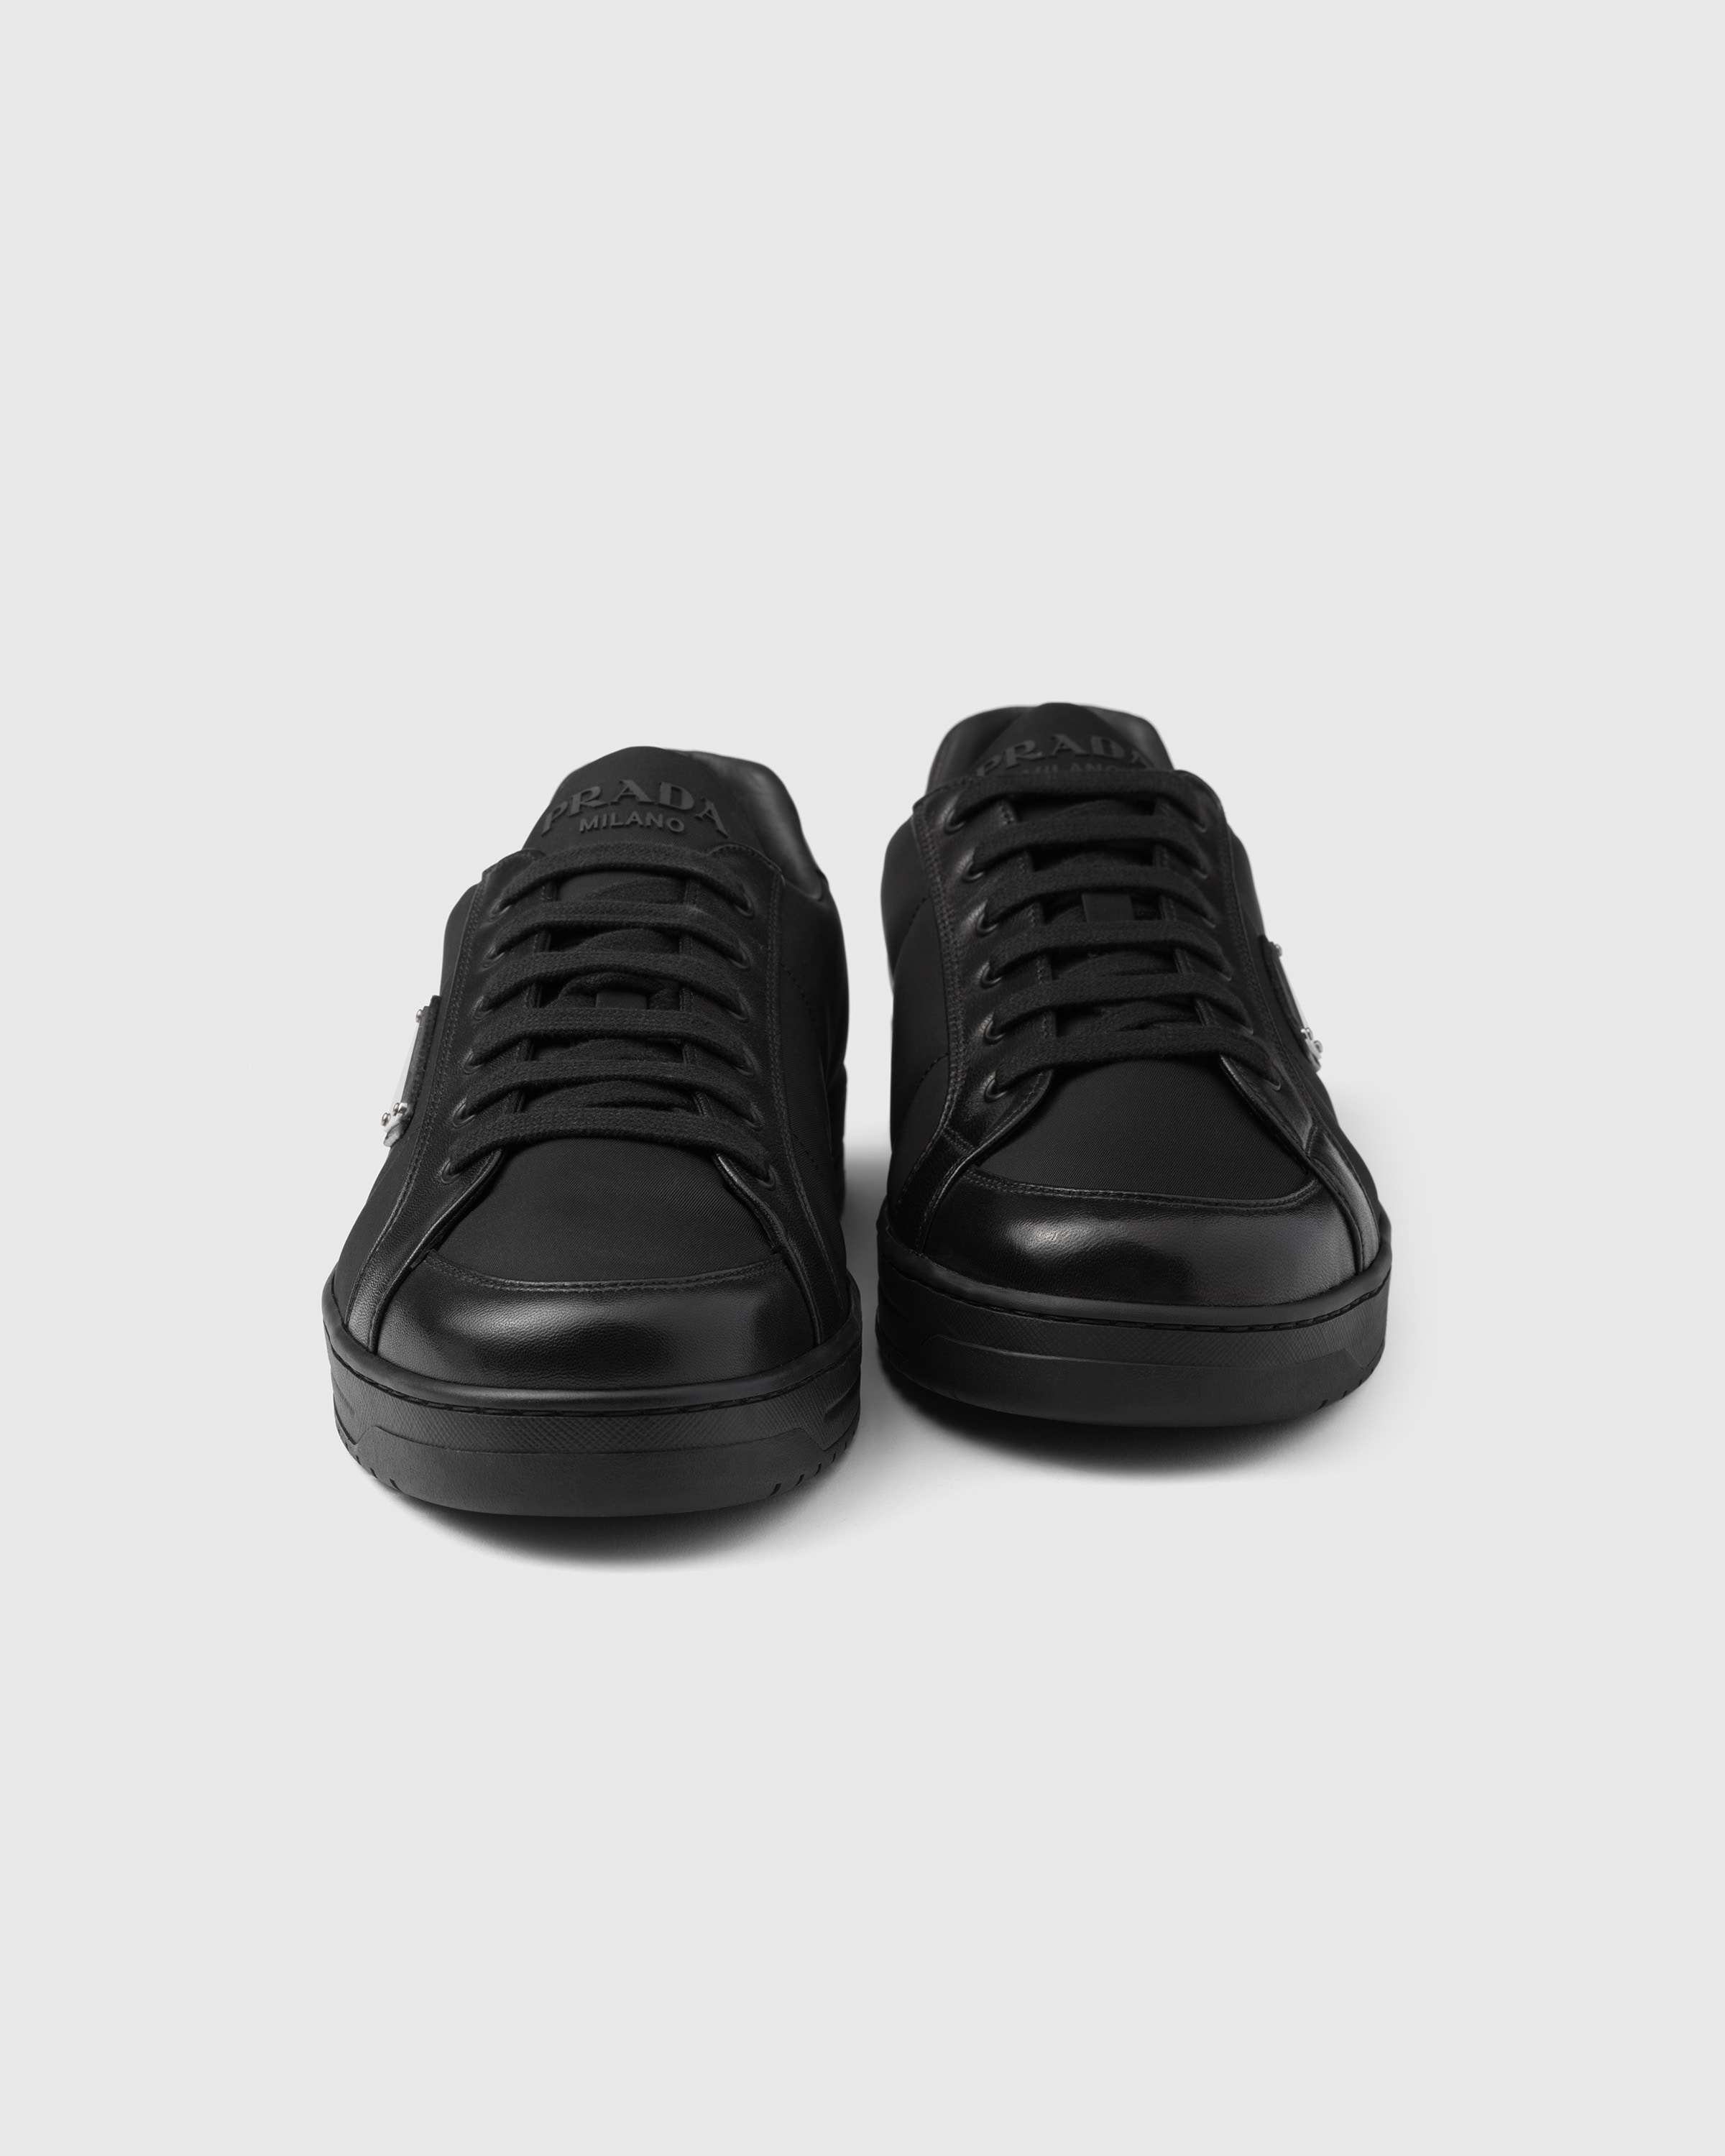 Downtown nappa leather and Re-Nylon sneakers - 5